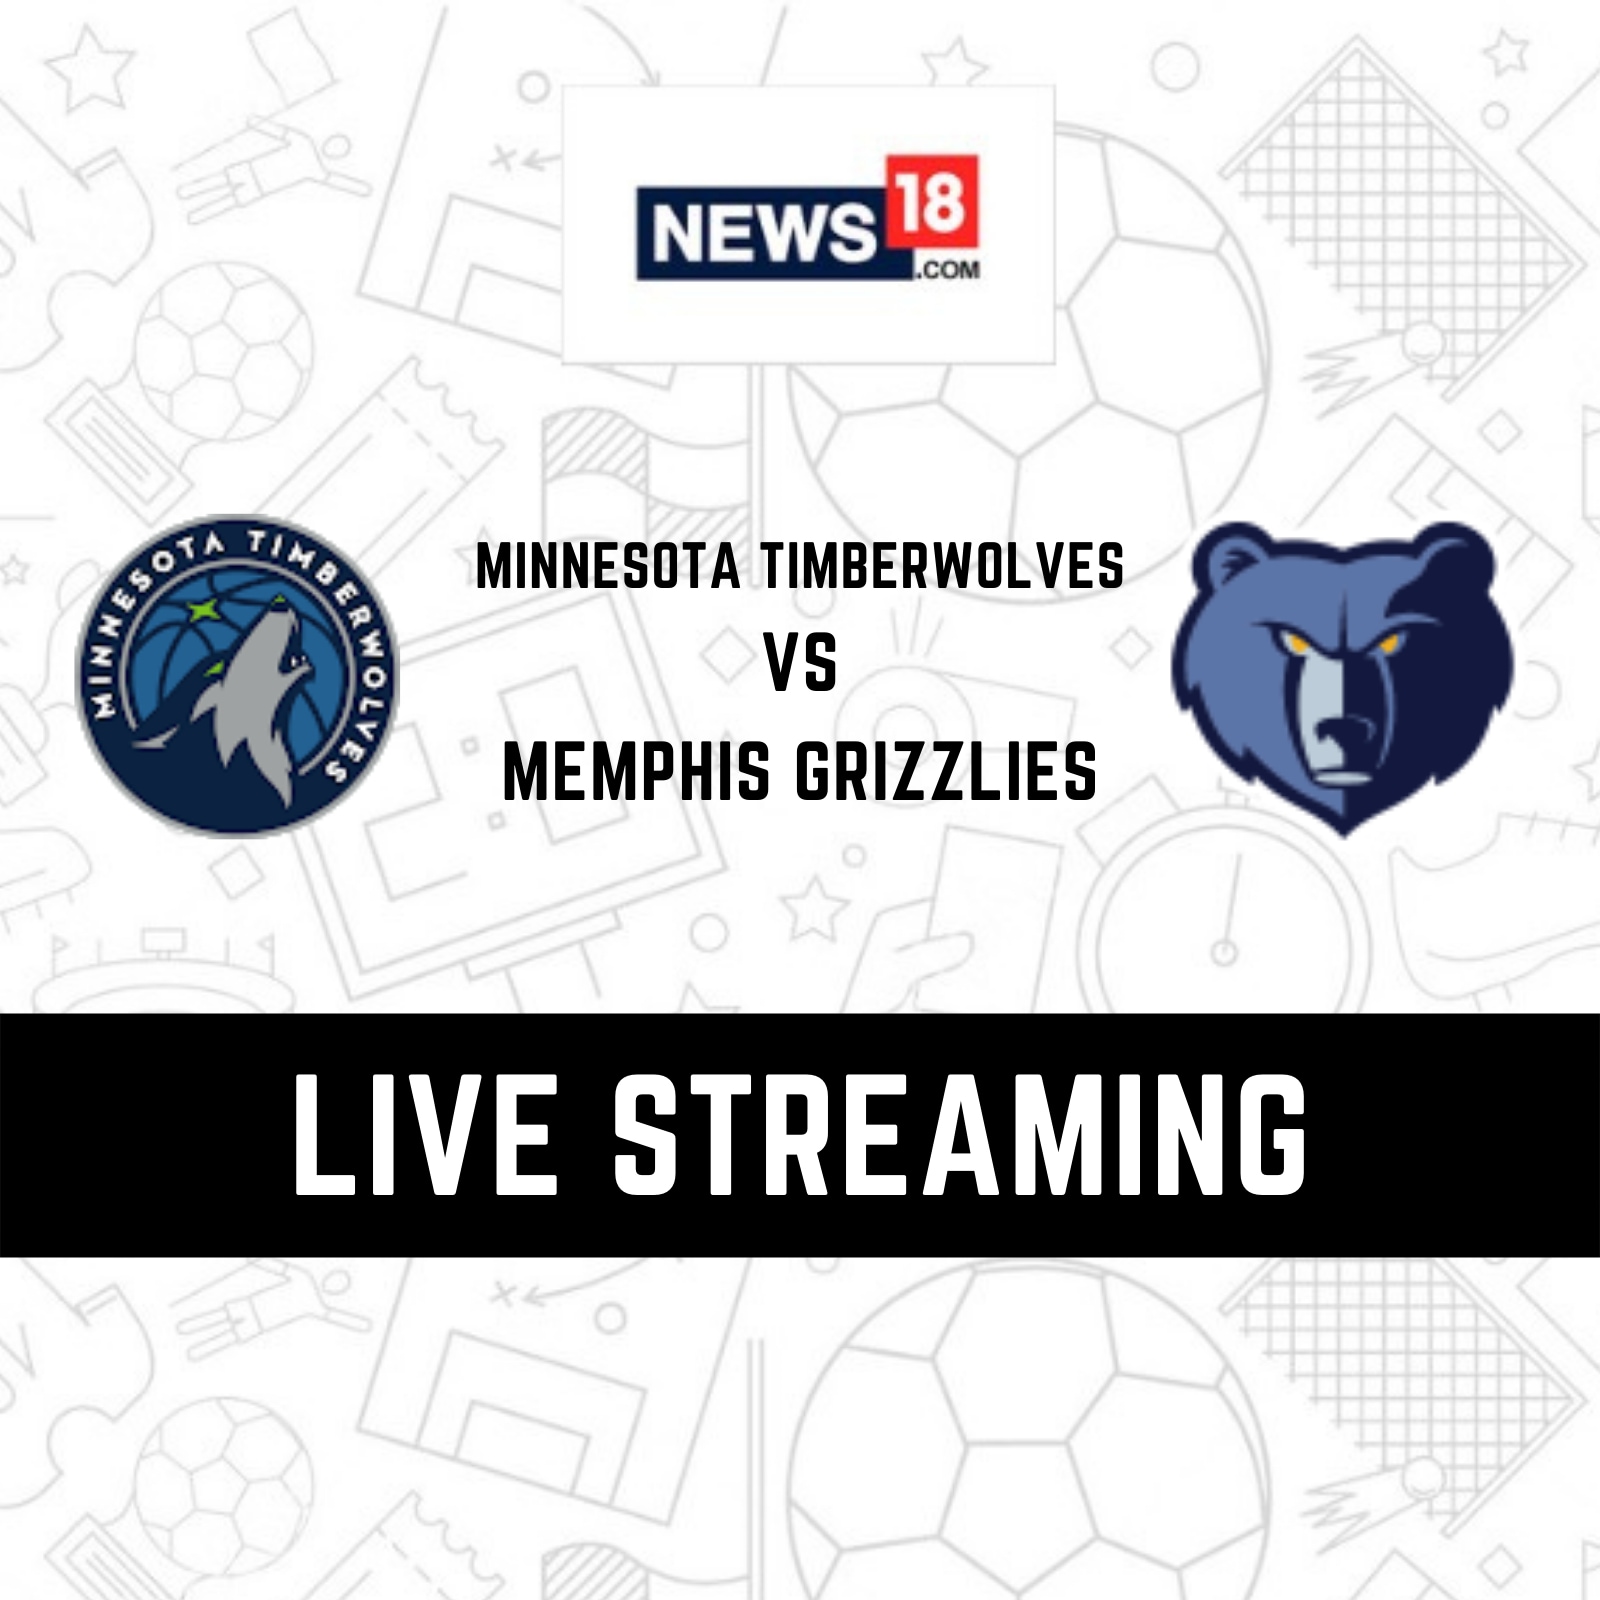 Minnesota Timberwolves vs Memphis Grizzlies Live Streaming When and Where to Watch NBA 2022 playoffs Live Coverage on Live TV Online